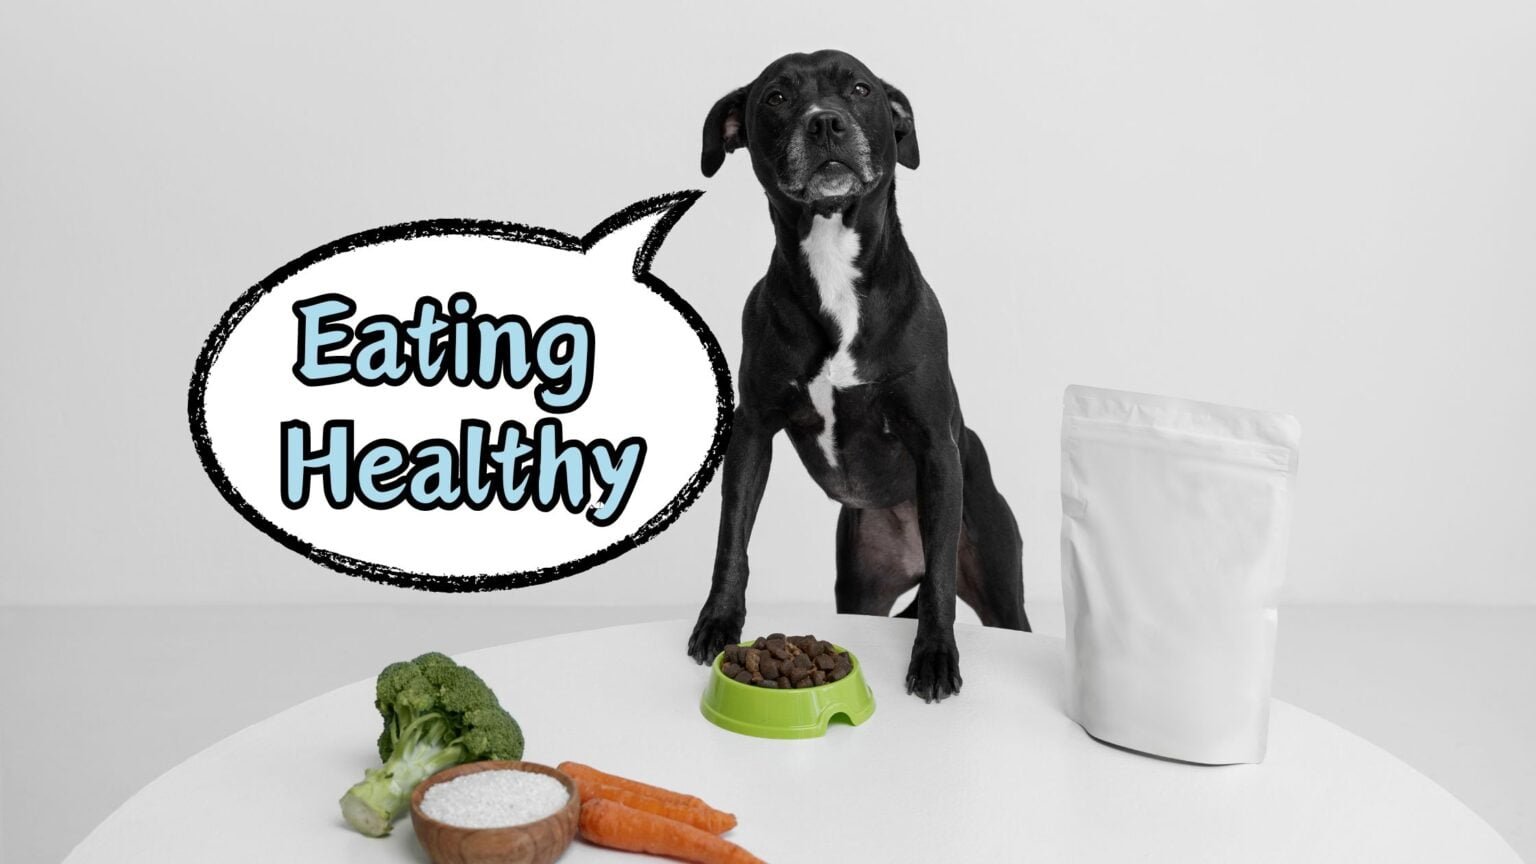 FOOD ALLERGIES IN DOGS